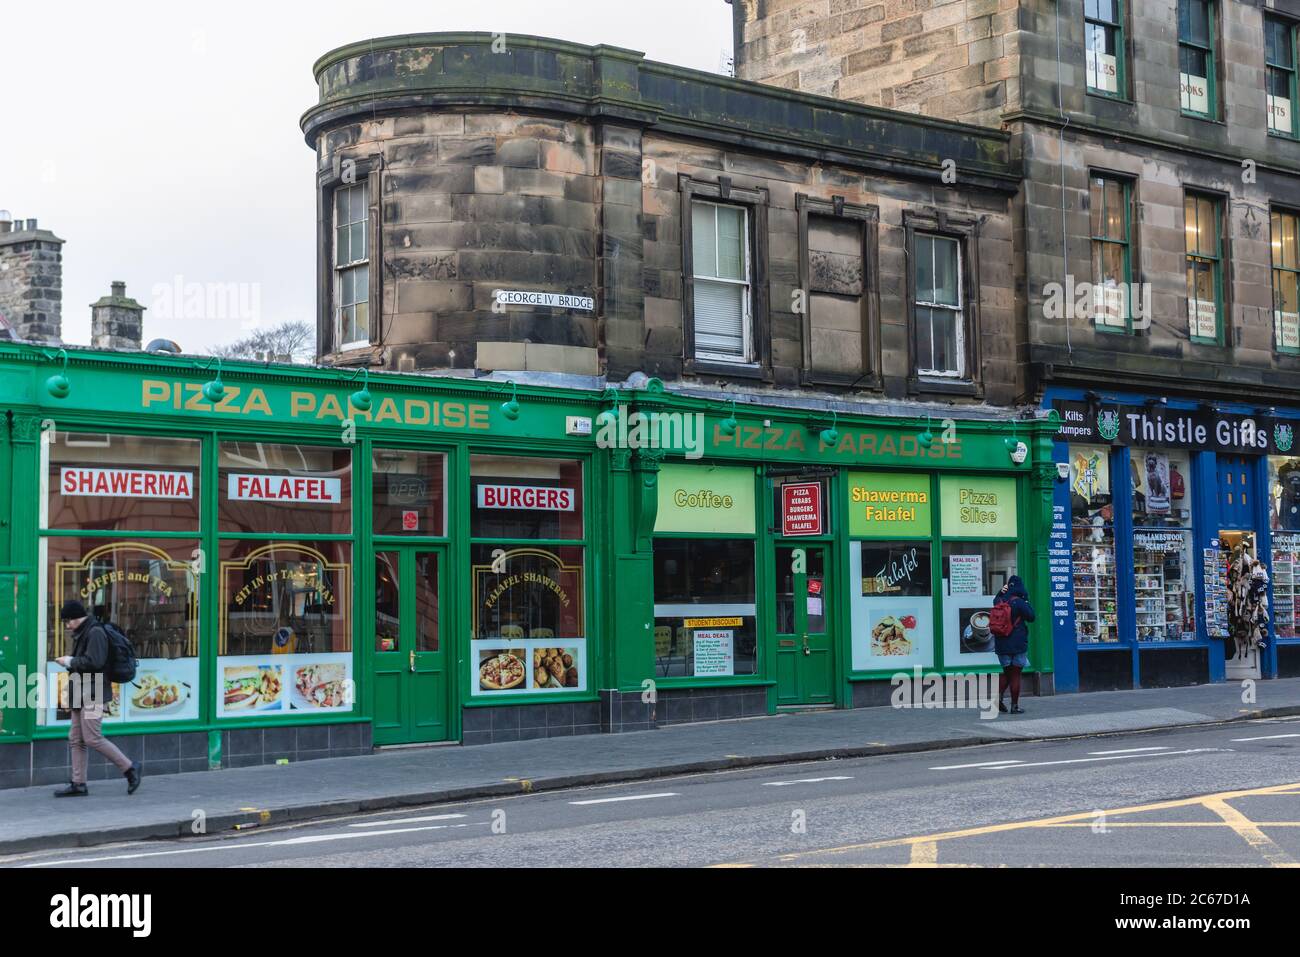 Pizza Paradise and Thistle Gifts shop on South Bridge street in Edinburgh, the capital of Scotland, part of United Kingdom Stock Photo